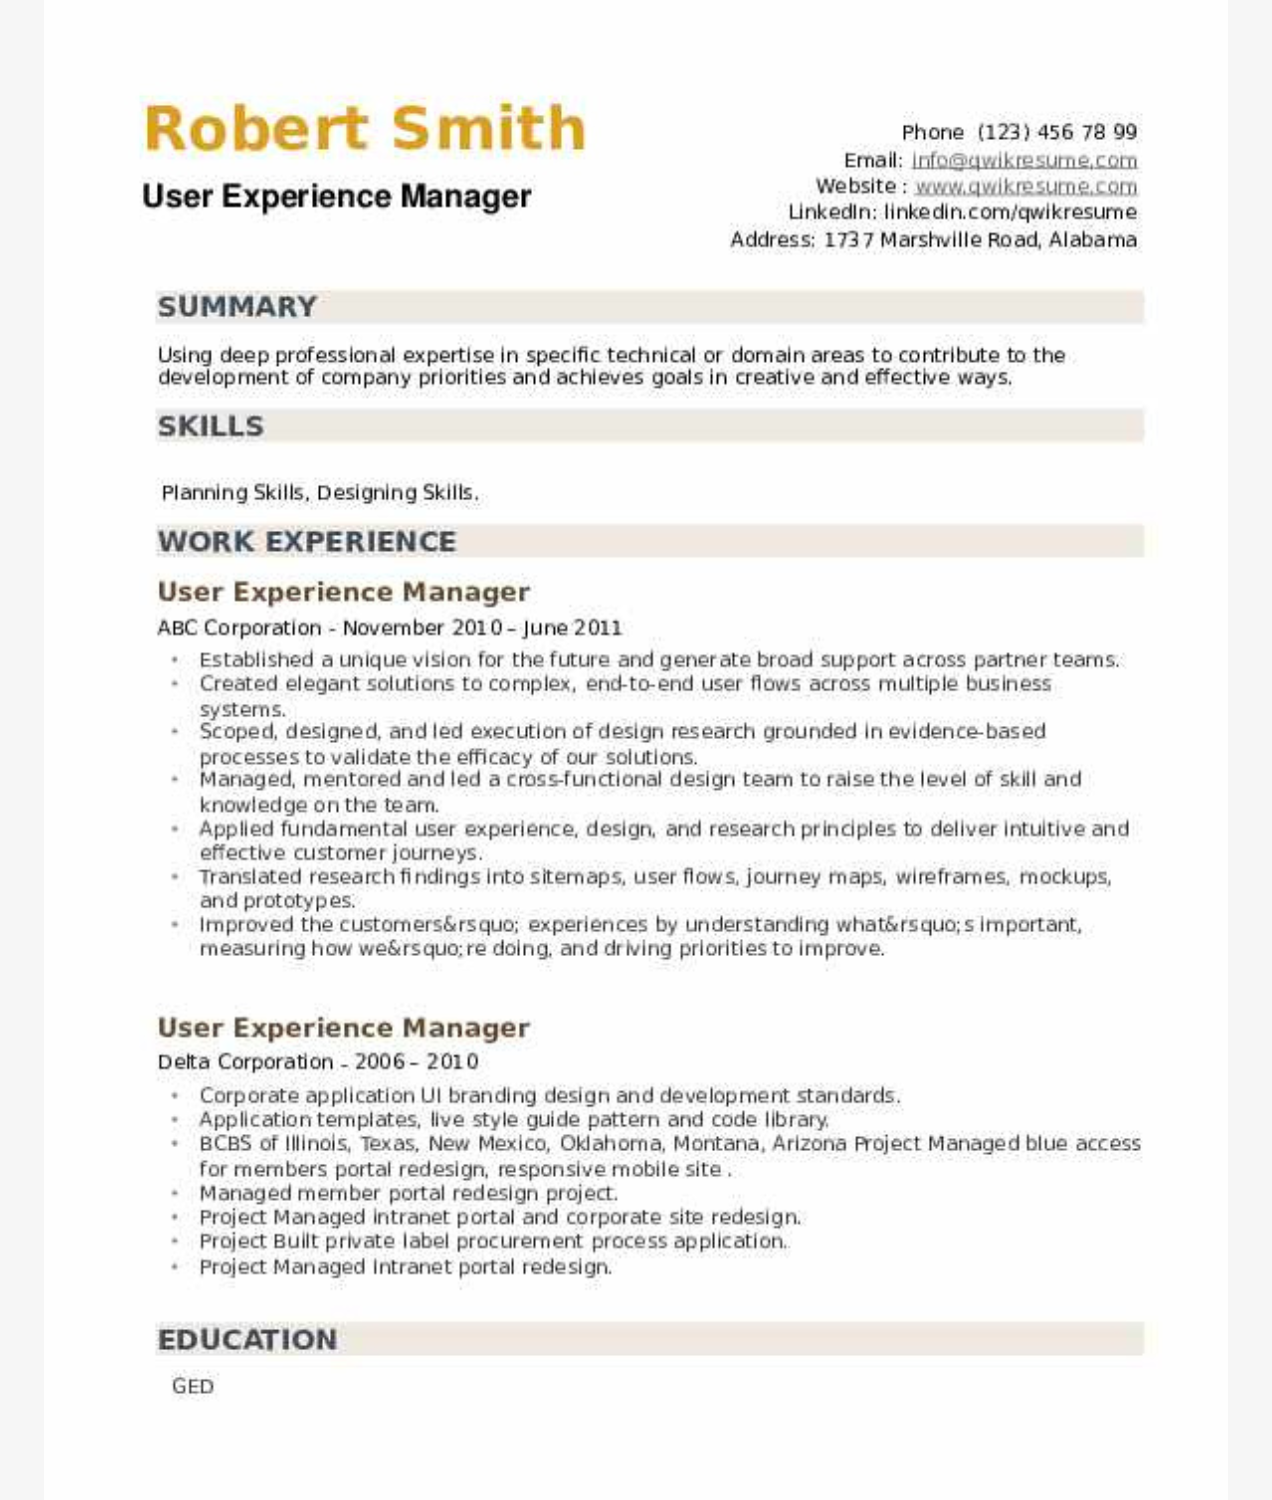 UX manager Resume